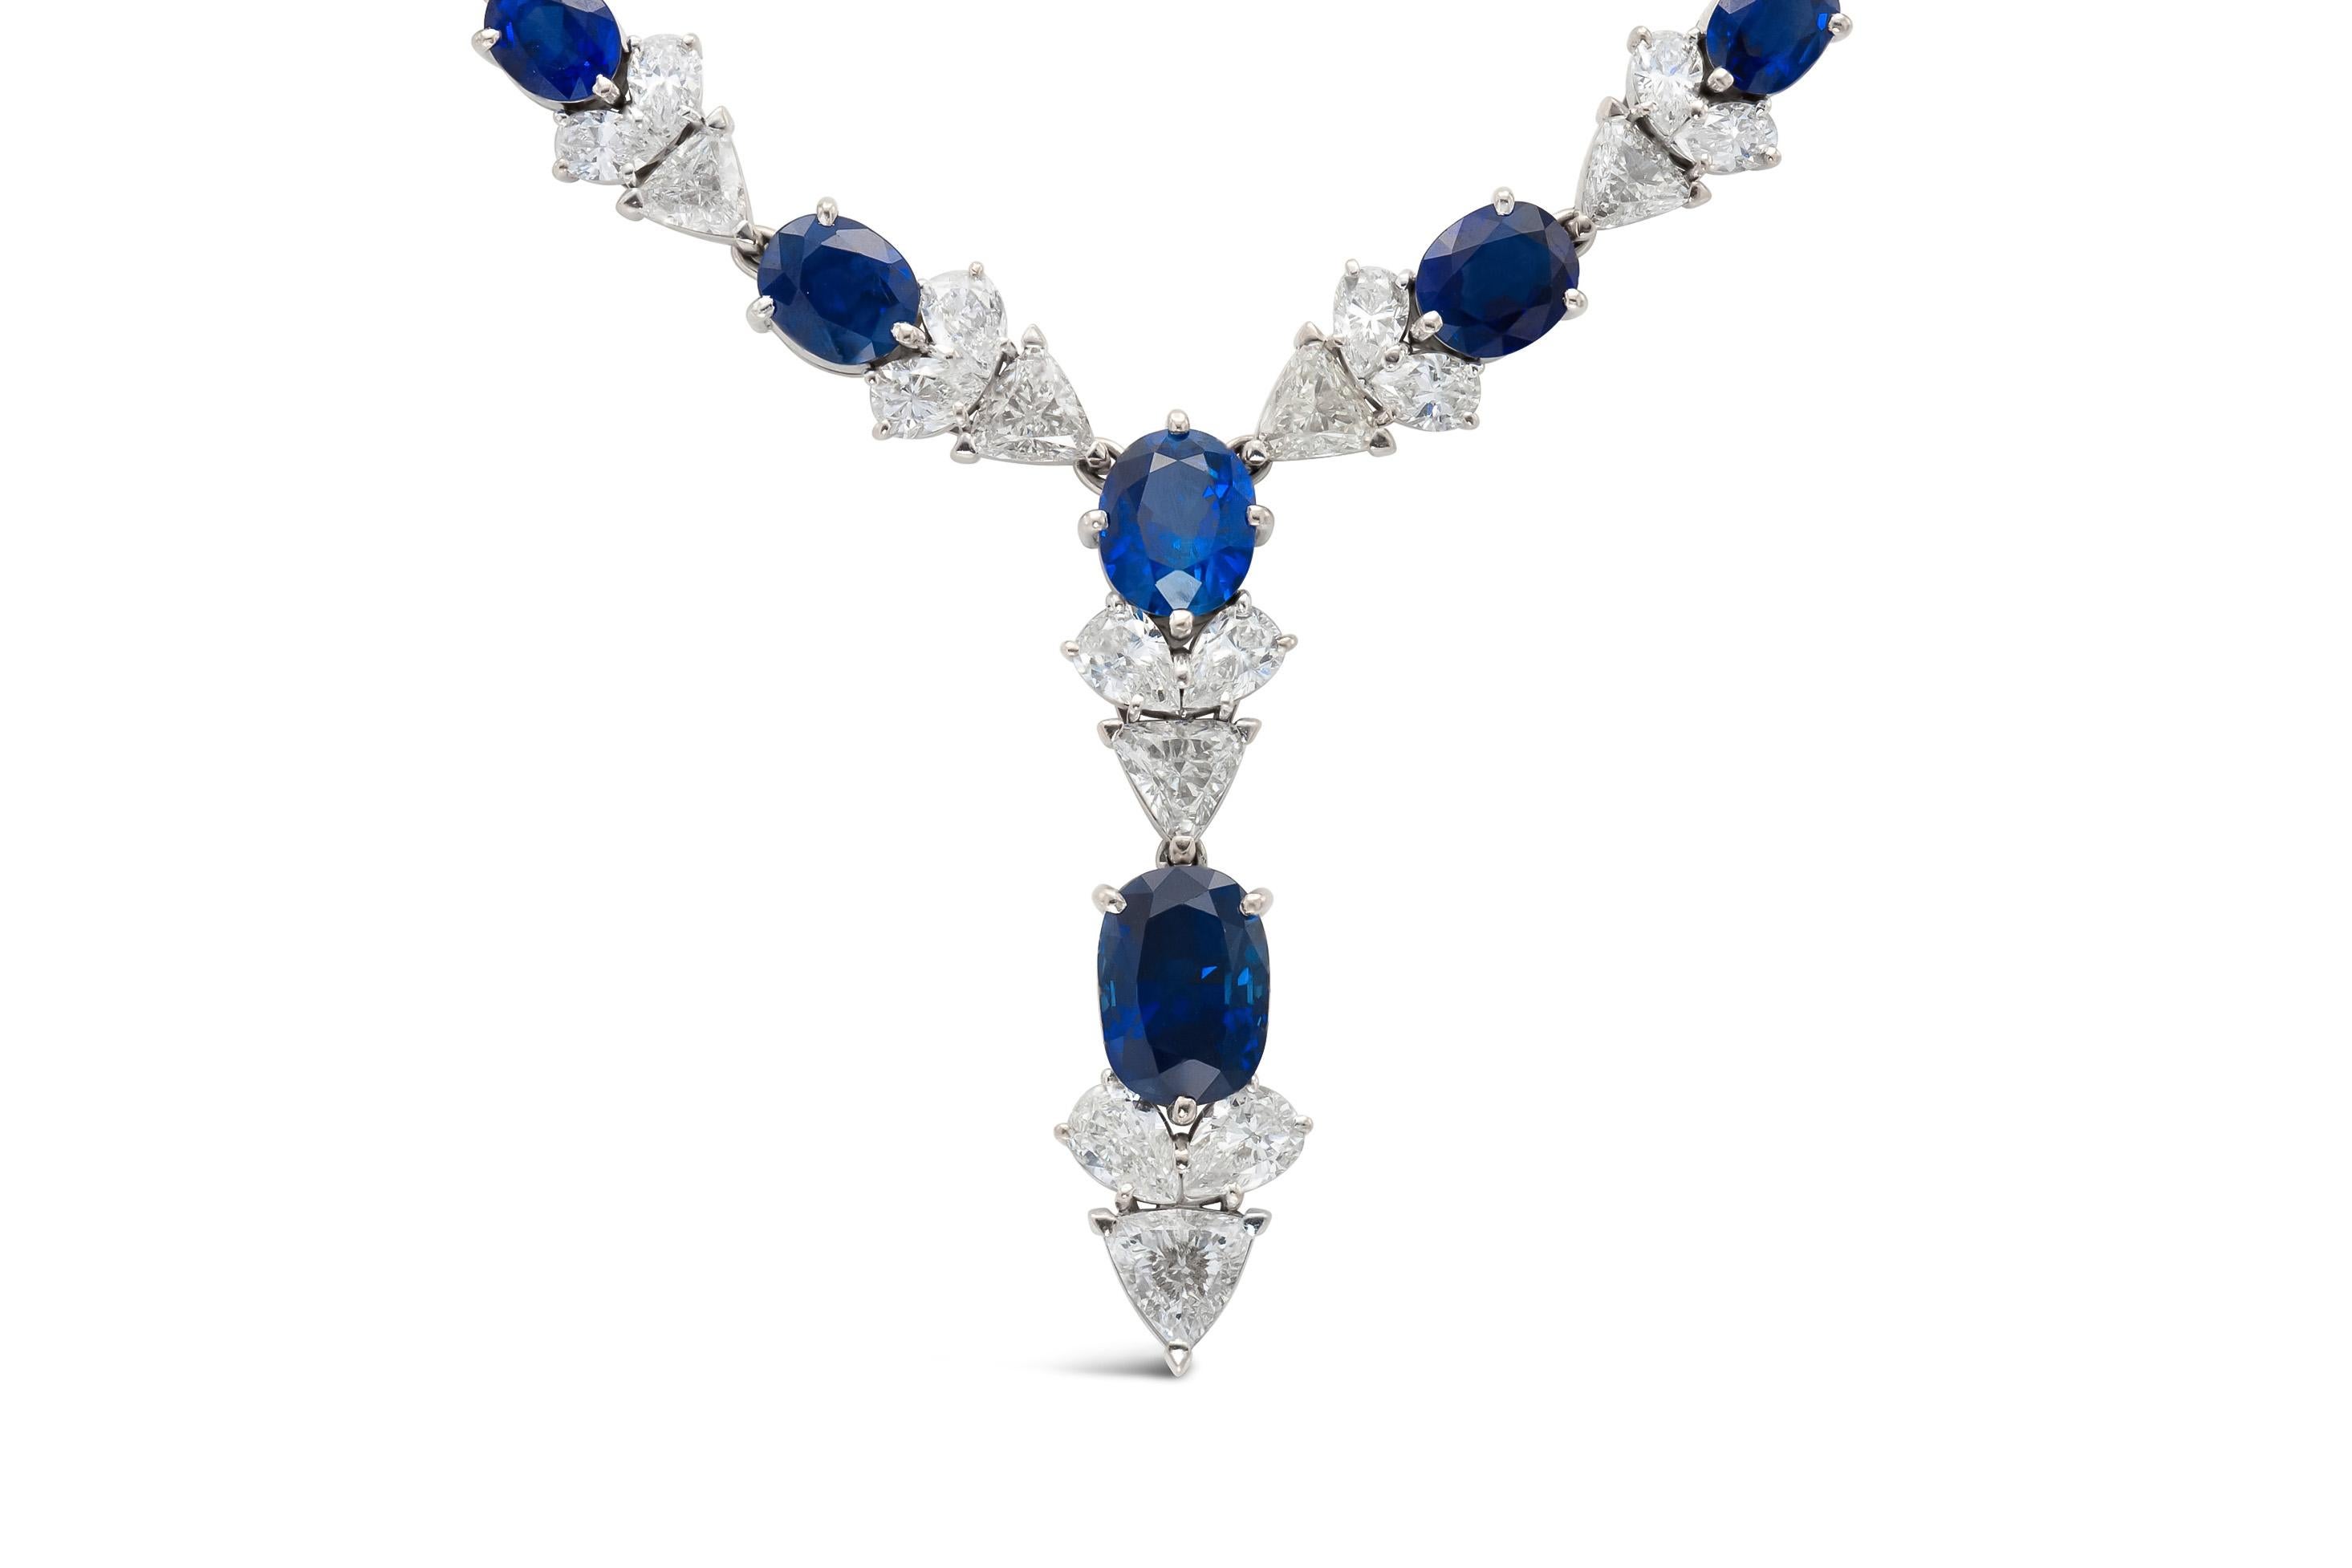 Finely crafted in 18K white gold featuring pear- and trillion-cut diamonds weighing a total of approximately 26.00 carats and oval cushion-cut sapphires weighing a total of approximately 32.00 carats. Circa 1960s-70s.